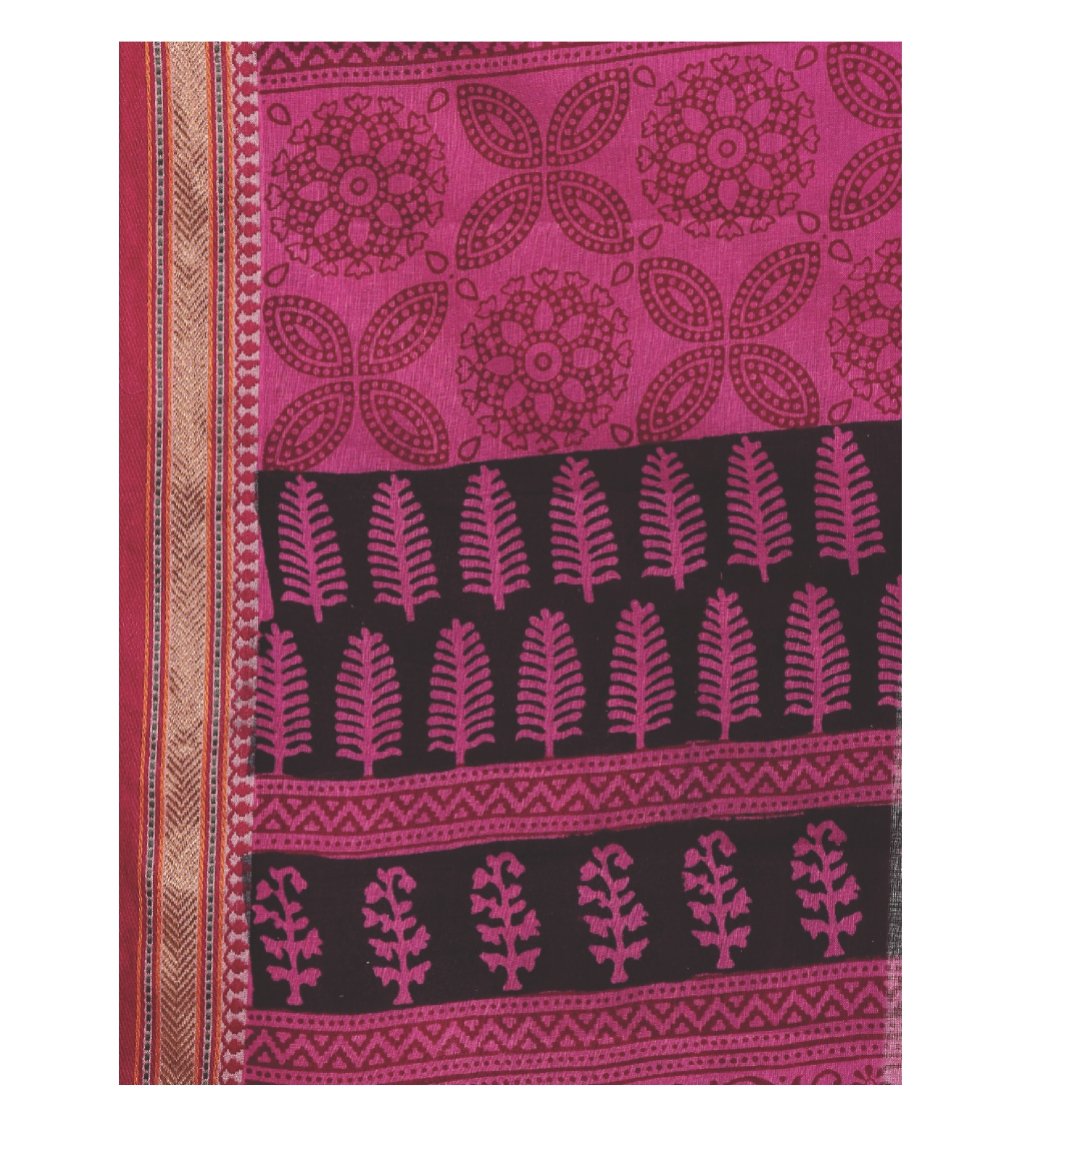 Pink Cotton Hand Block Bagh Print Handcrafted Saree-Saree-Kalakari India-ZIBASA0082-Bagh, Cotton, Geographical Indication, Hand Blocks, Hand Crafted, Heritage Prints, Natural Dyes, Sarees, Sustainable Fabrics-[Linen,Ethnic,wear,Fashionista,Handloom,Handicraft,Indigo,blockprint,block,print,Cotton,Chanderi,Blue, latest,classy,party,bollywood,trendy,summer,style,traditional,formal,elegant,unique,style,hand,block,print, dabu,booti,gift,present,glamorous,affordable,collectible,Sari,Saree,printed, hol